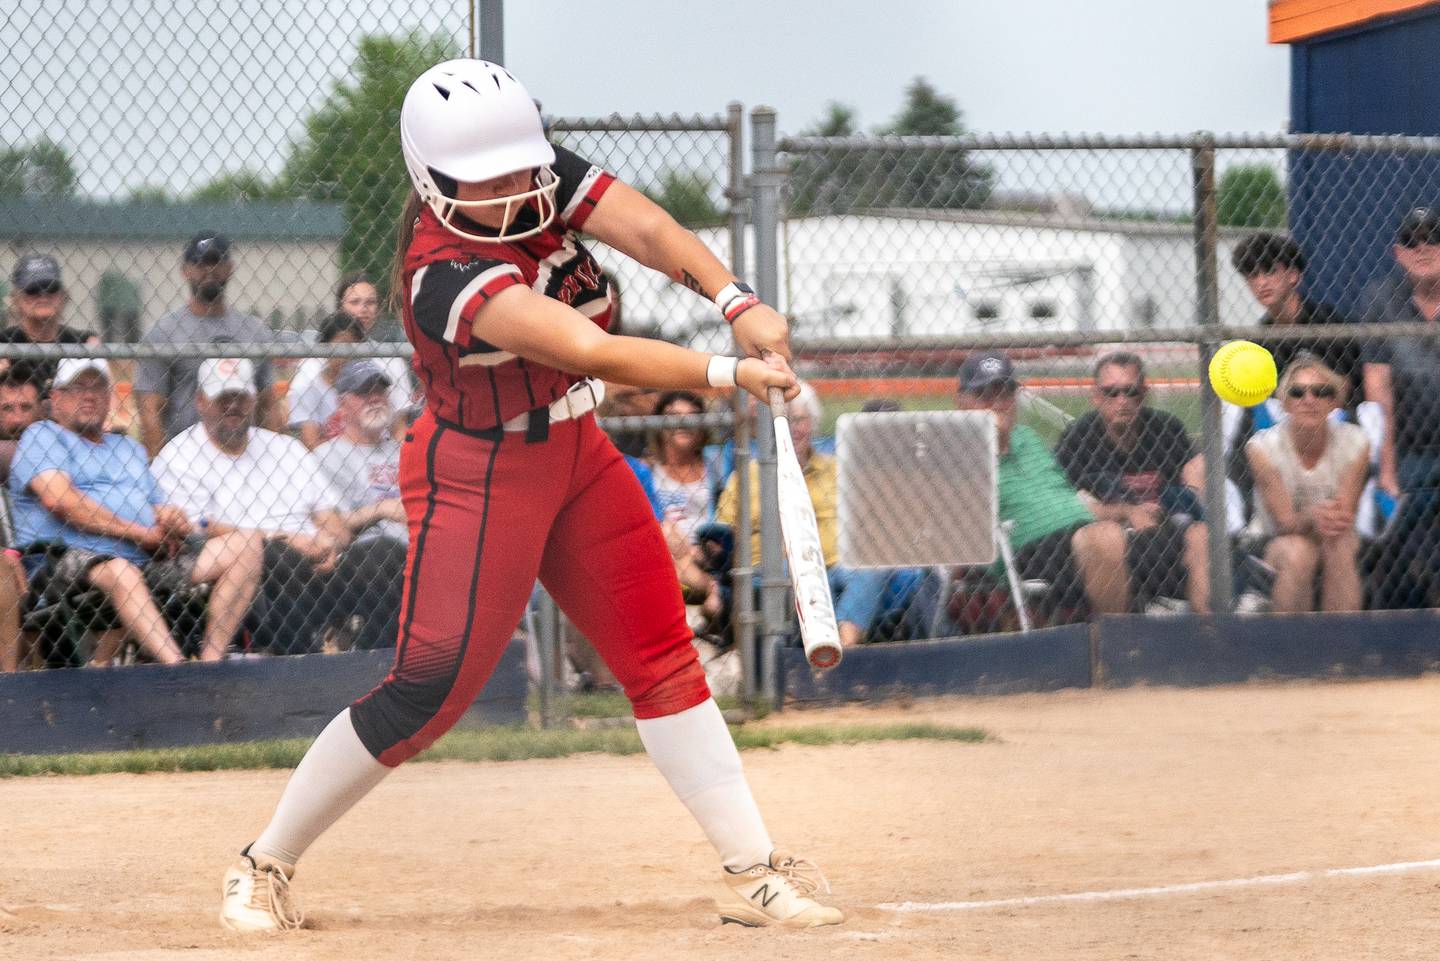 Yorkville's Sara Ebner (14) triples driving in a run against Oswego East during the Class 4A Oswego softball sectional semifinal game between Yorkville and Oswego East at Oswego High School on Tuesday, May 30, 2023.